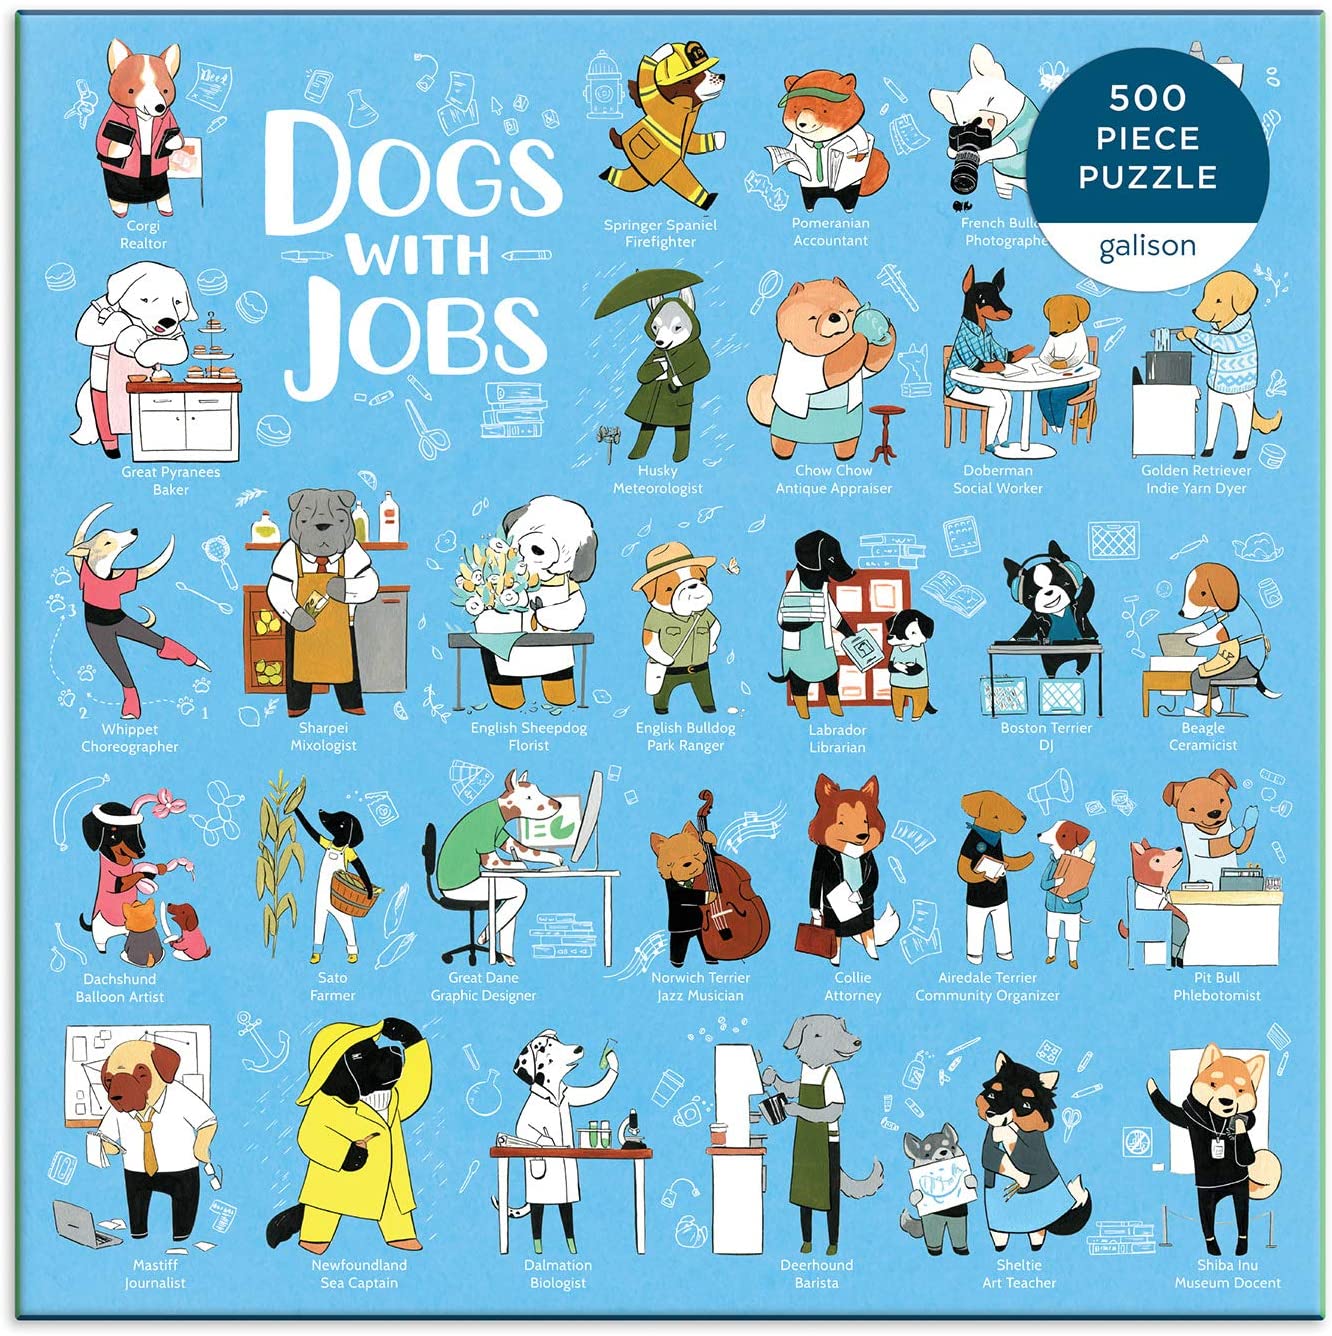 Dogs Performing Jobs 500 Piece Jigsaw Puzzle - Galison